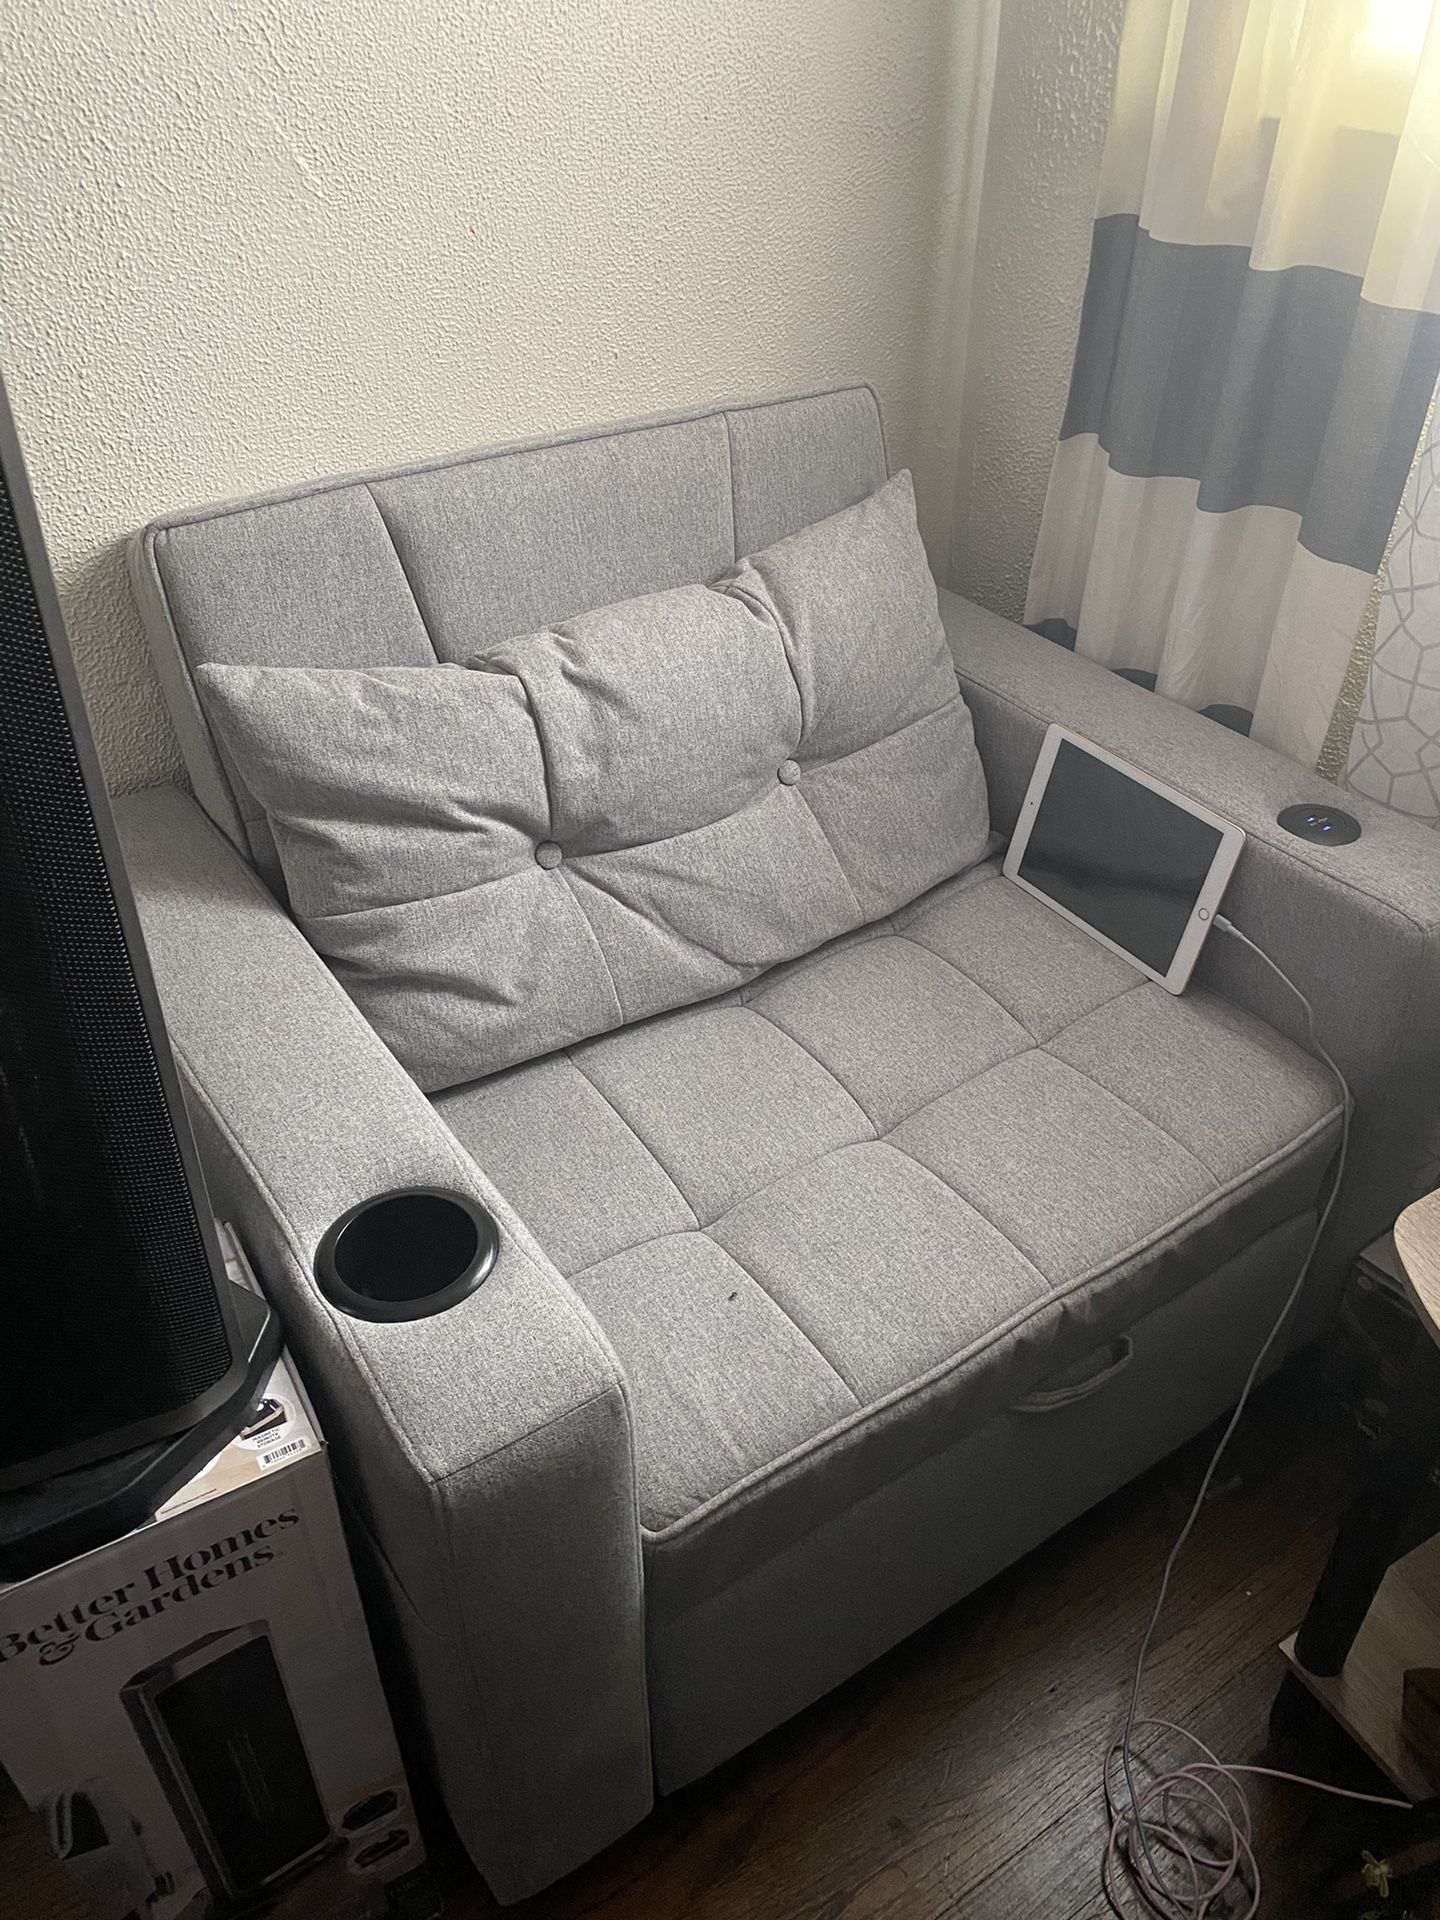 Sofa And Couch, Futon Bed